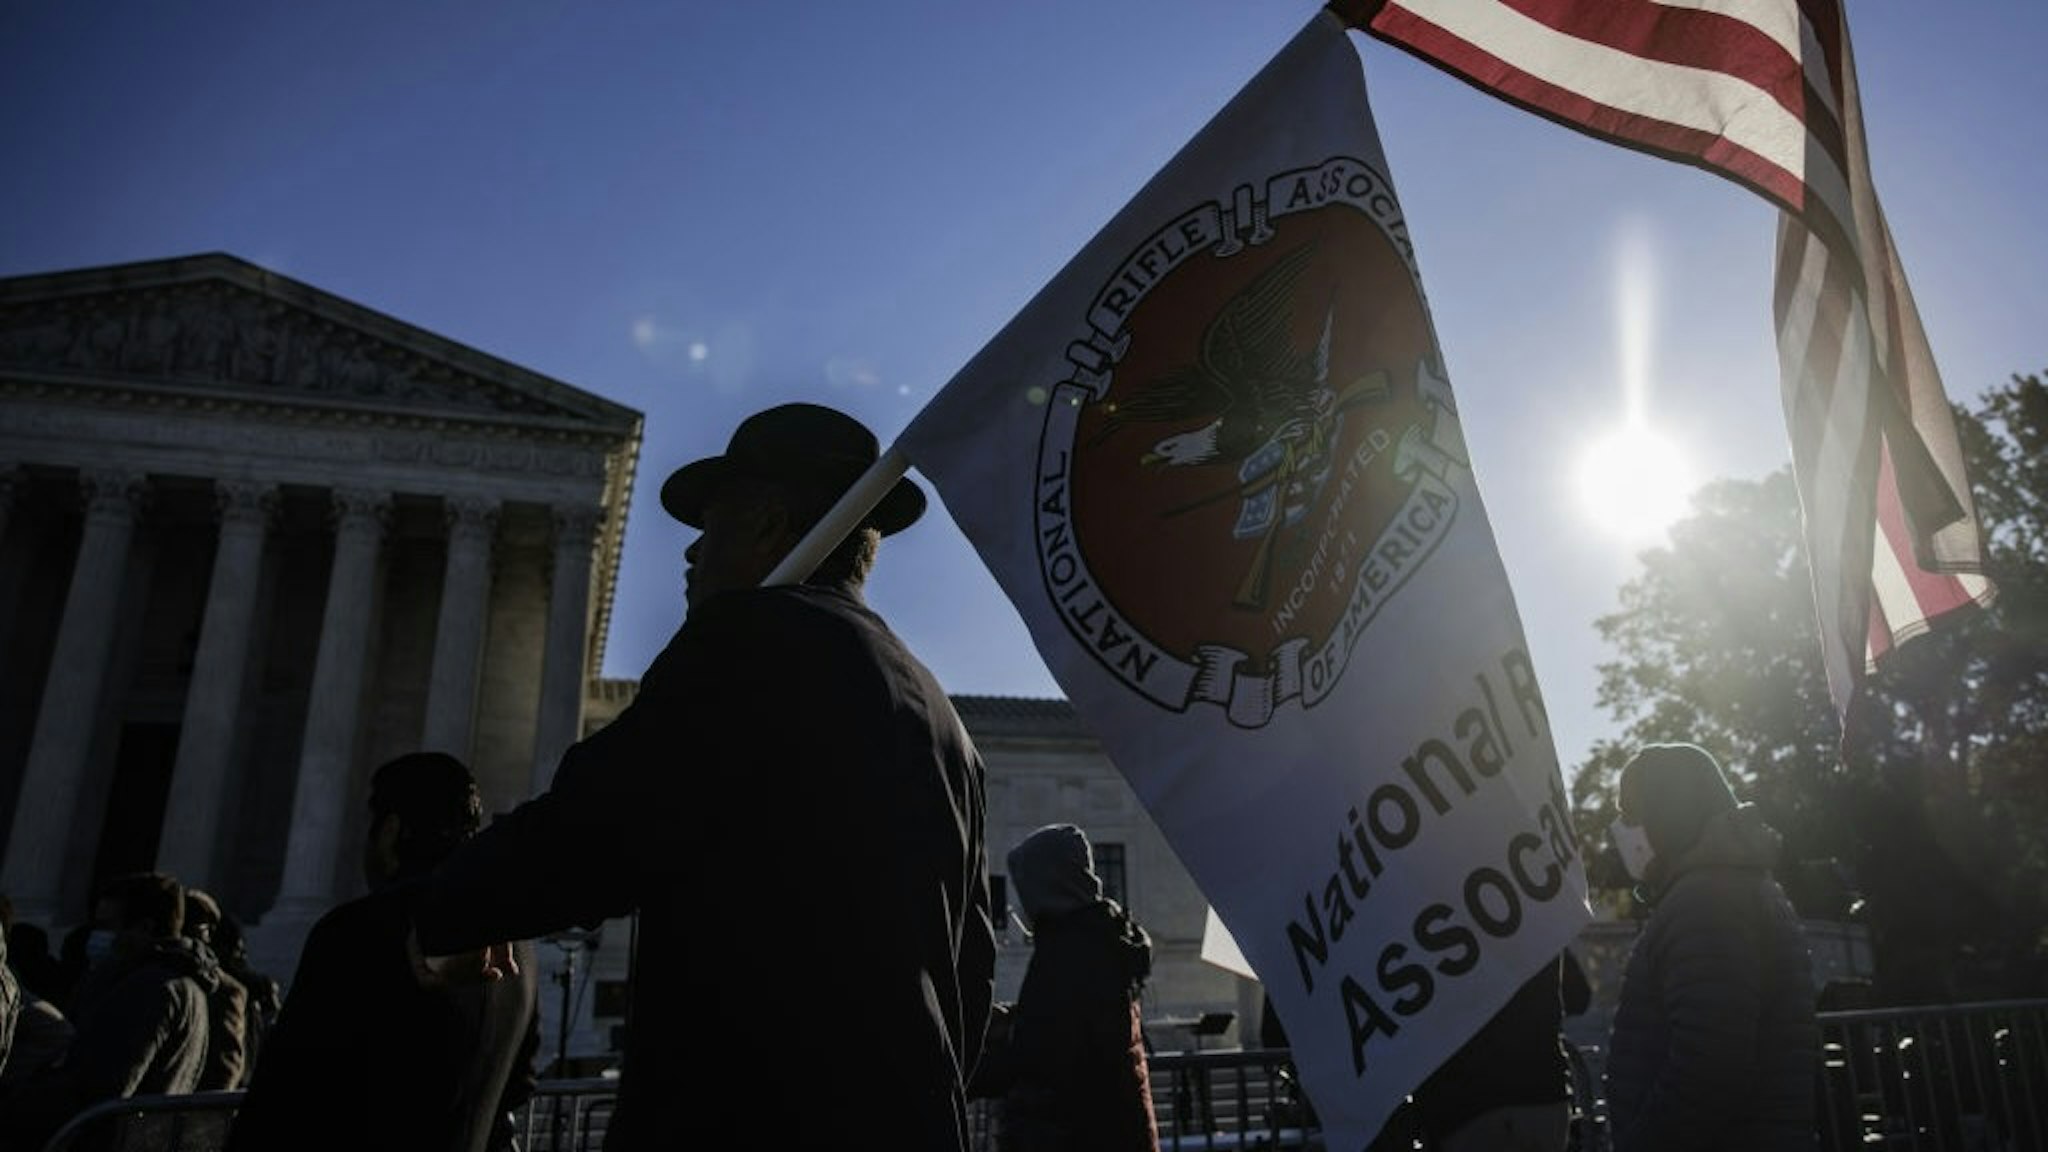 Supreme Courts Hears Arguments In Second Amendment Case A Second Amendment demonstrator holds American and National Rifle Association (NRA) flags outside the U.S. Supreme Court in Washington, D.C., U.S., on Wednesday, Nov. 3, 2021. The court is hearing its biggest Second Amendment case in more than a decade today when it considers a challenge to New York's tight limits on the right to carry a concealed handgun in public. Photographer: Samuel Corum/Bloomberg via Getty Images Bloomberg / Contributor